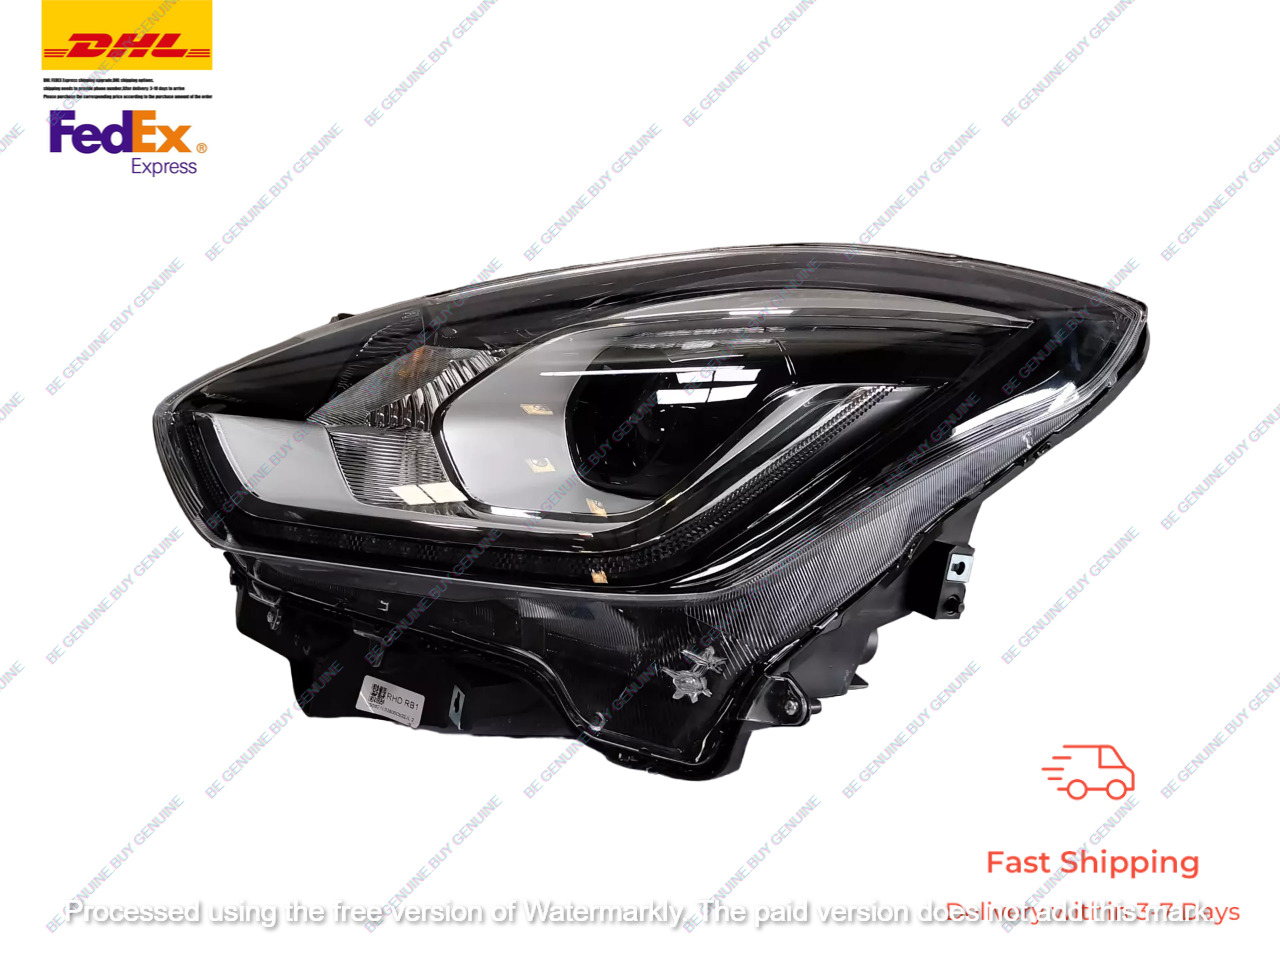 Genuine Front Head Light LED LEFT SIDE Fit For Suzuki Swift XENON TYPE 2018-2022